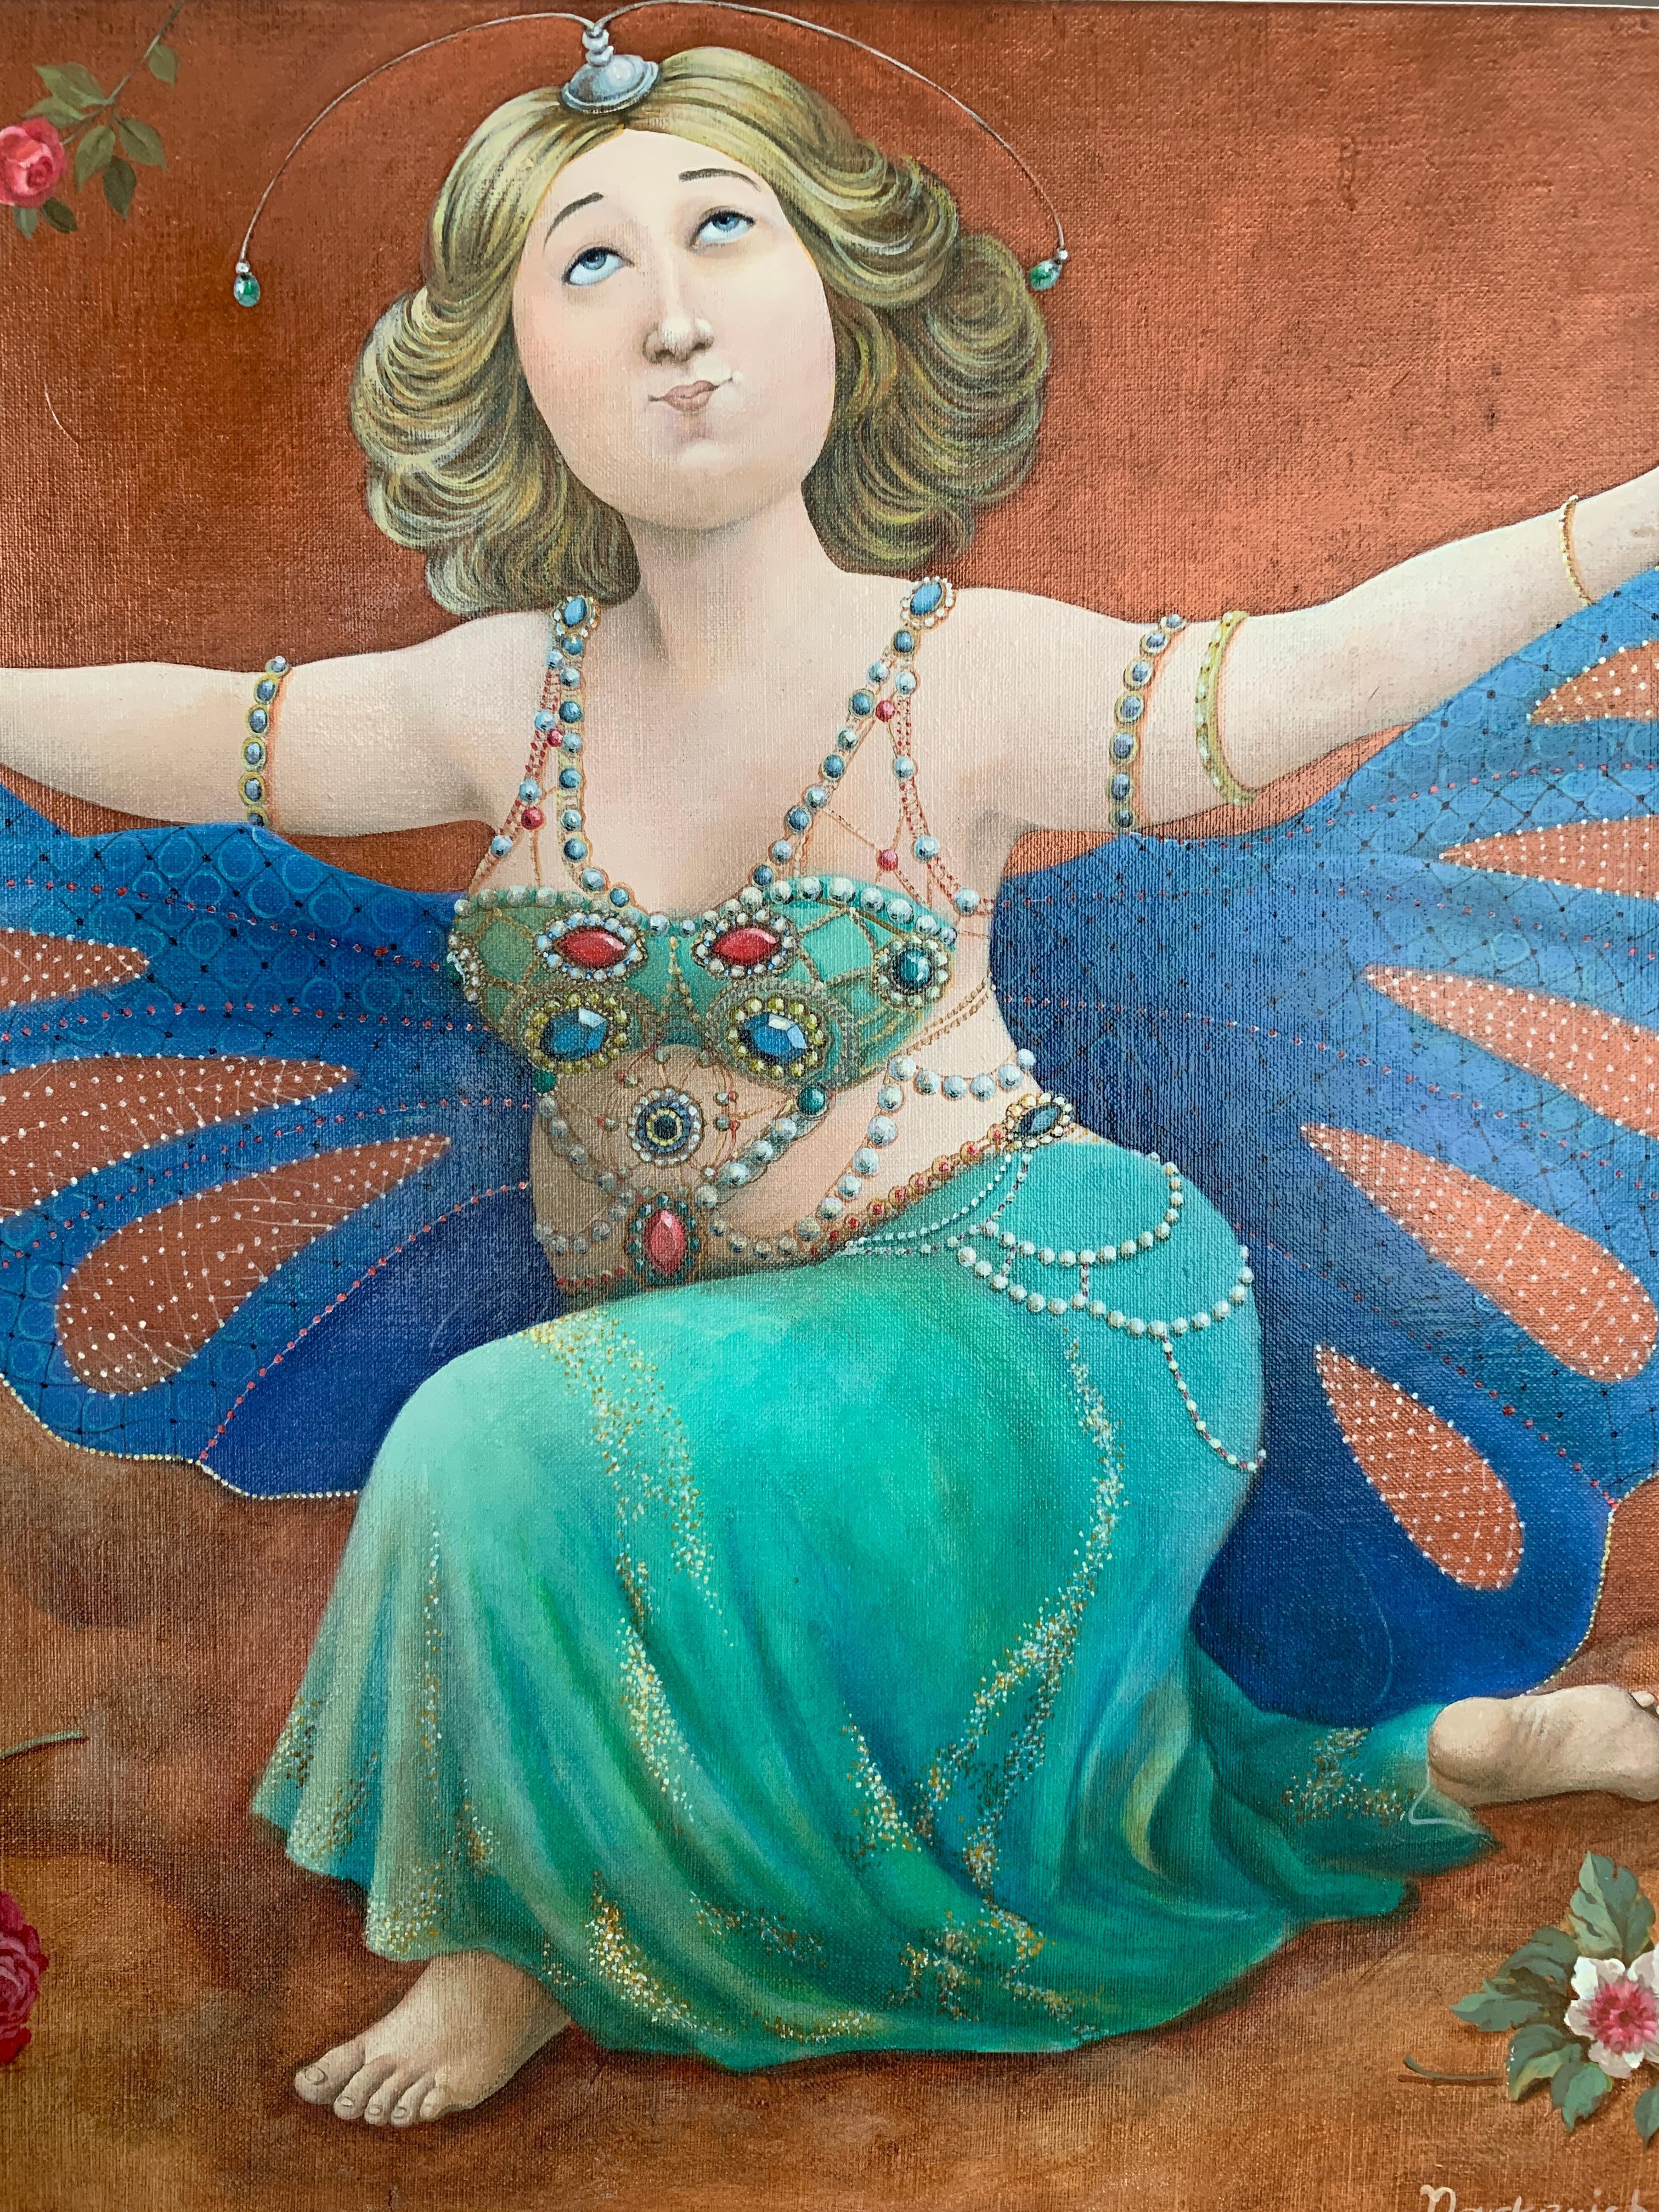 Blue Butterfly (A girl in a blue costume) - naive art, made in turquoise, blue - Painting by Elena Narkevich